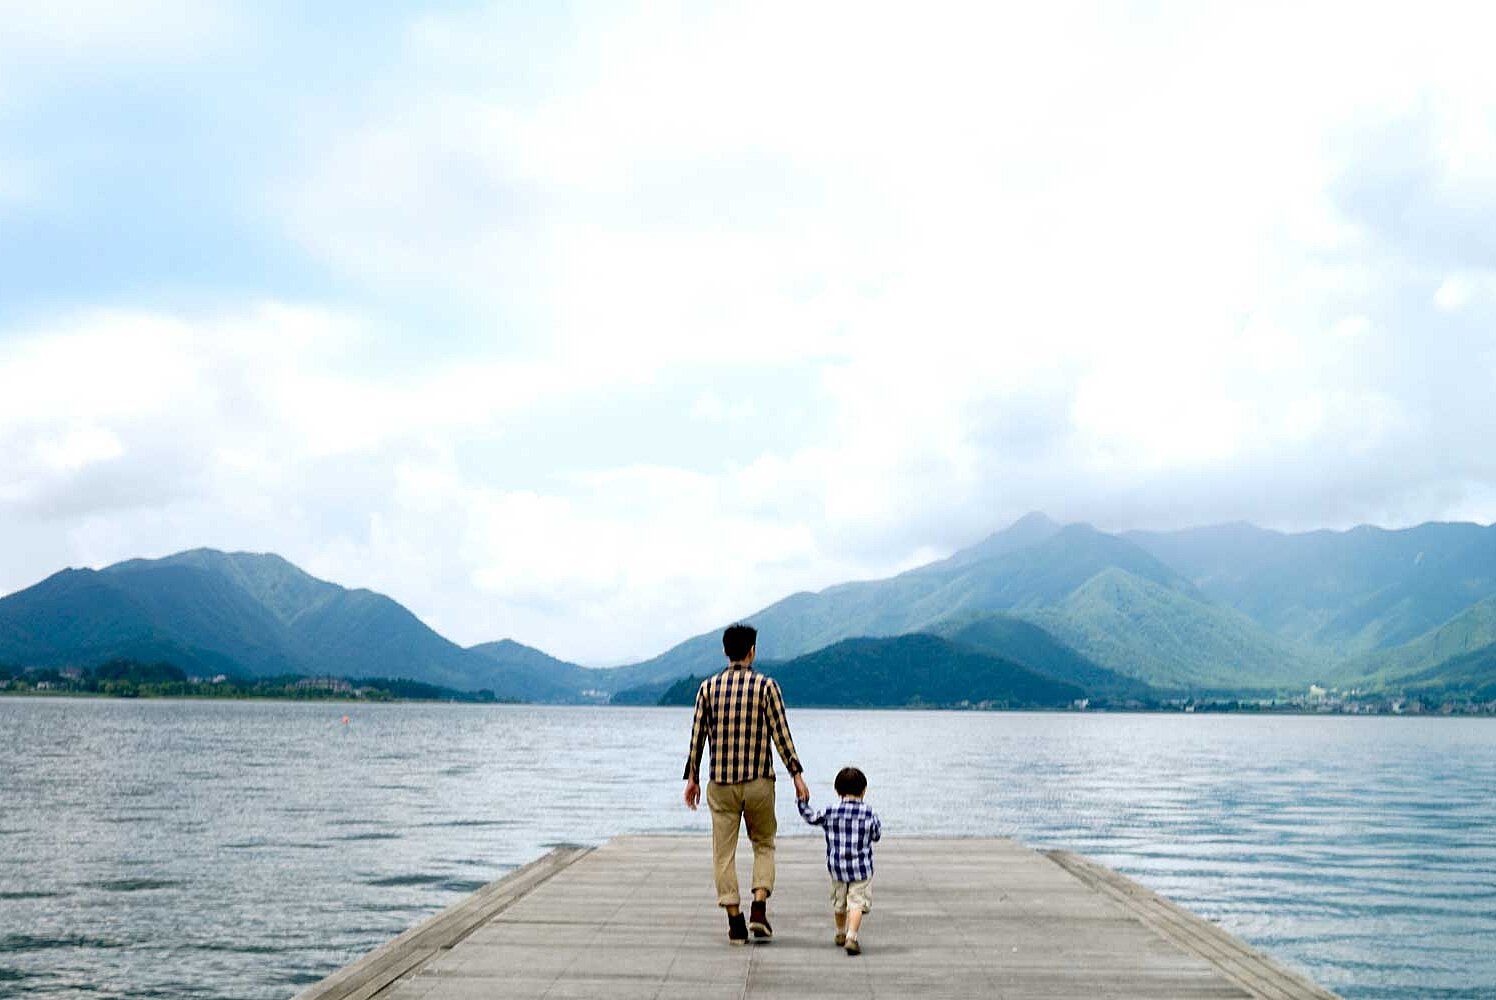 Cute and Funny Instagram Captions for Photo With Dad. Travel + Leisure